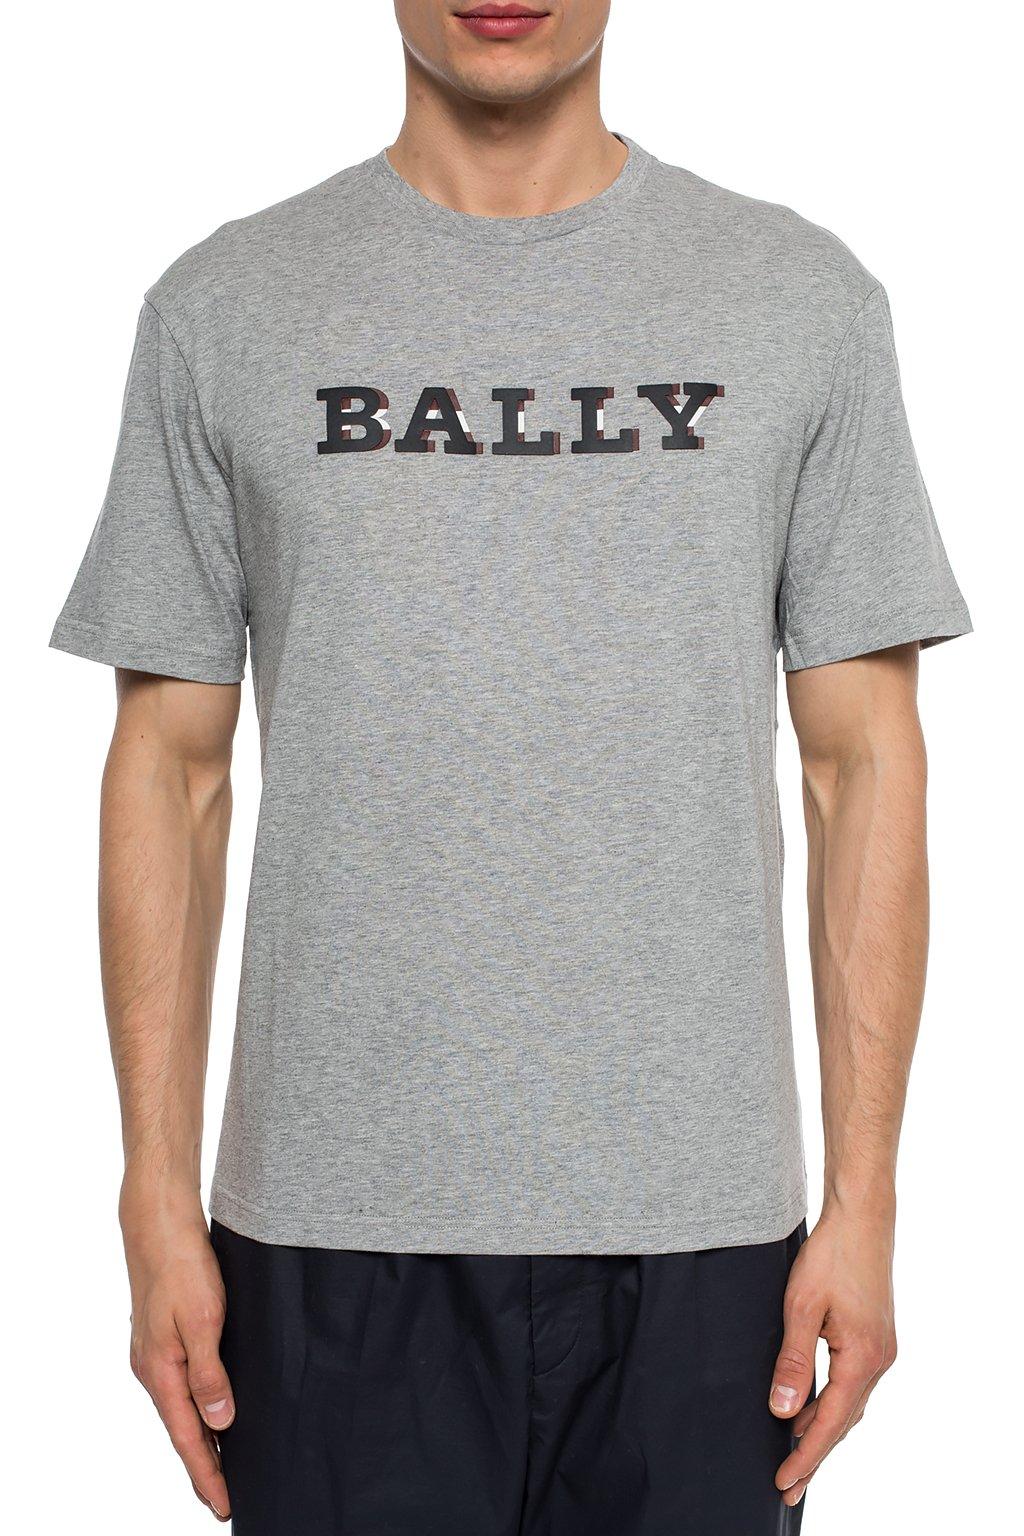 Bally Cotton Printed Logo T-shirt in Grey (Gray) for Men - Lyst